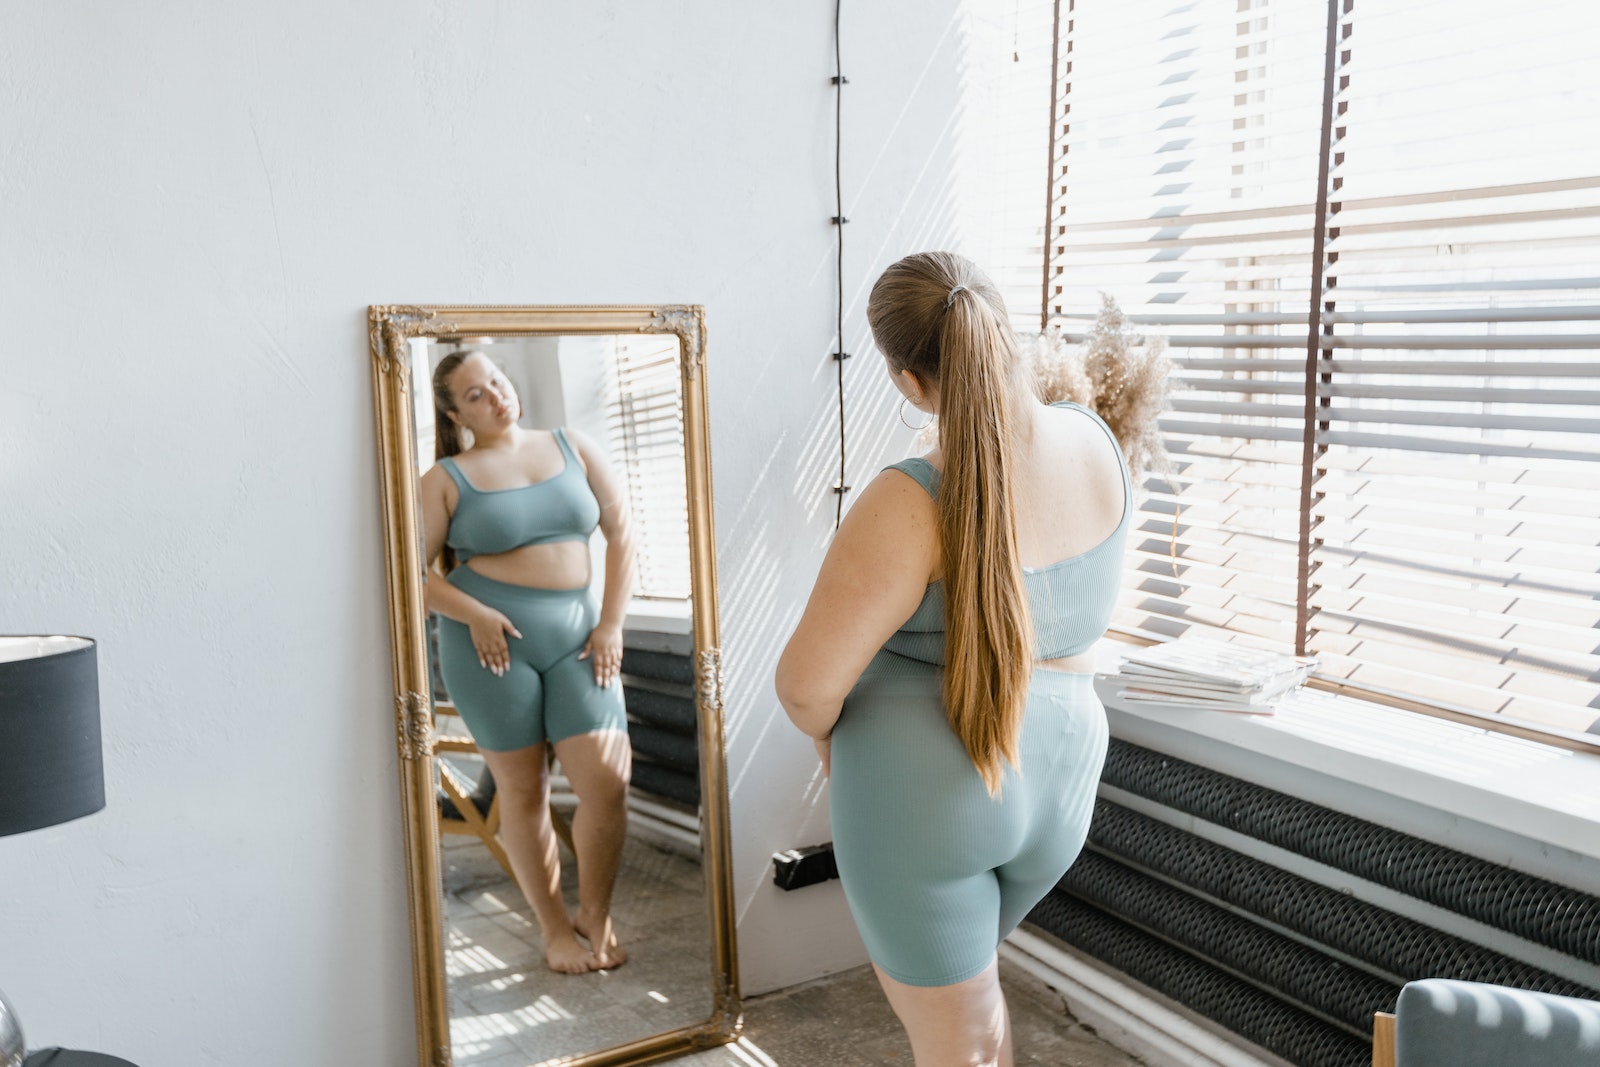 How to Overcome a Negative Body Image self-reflection